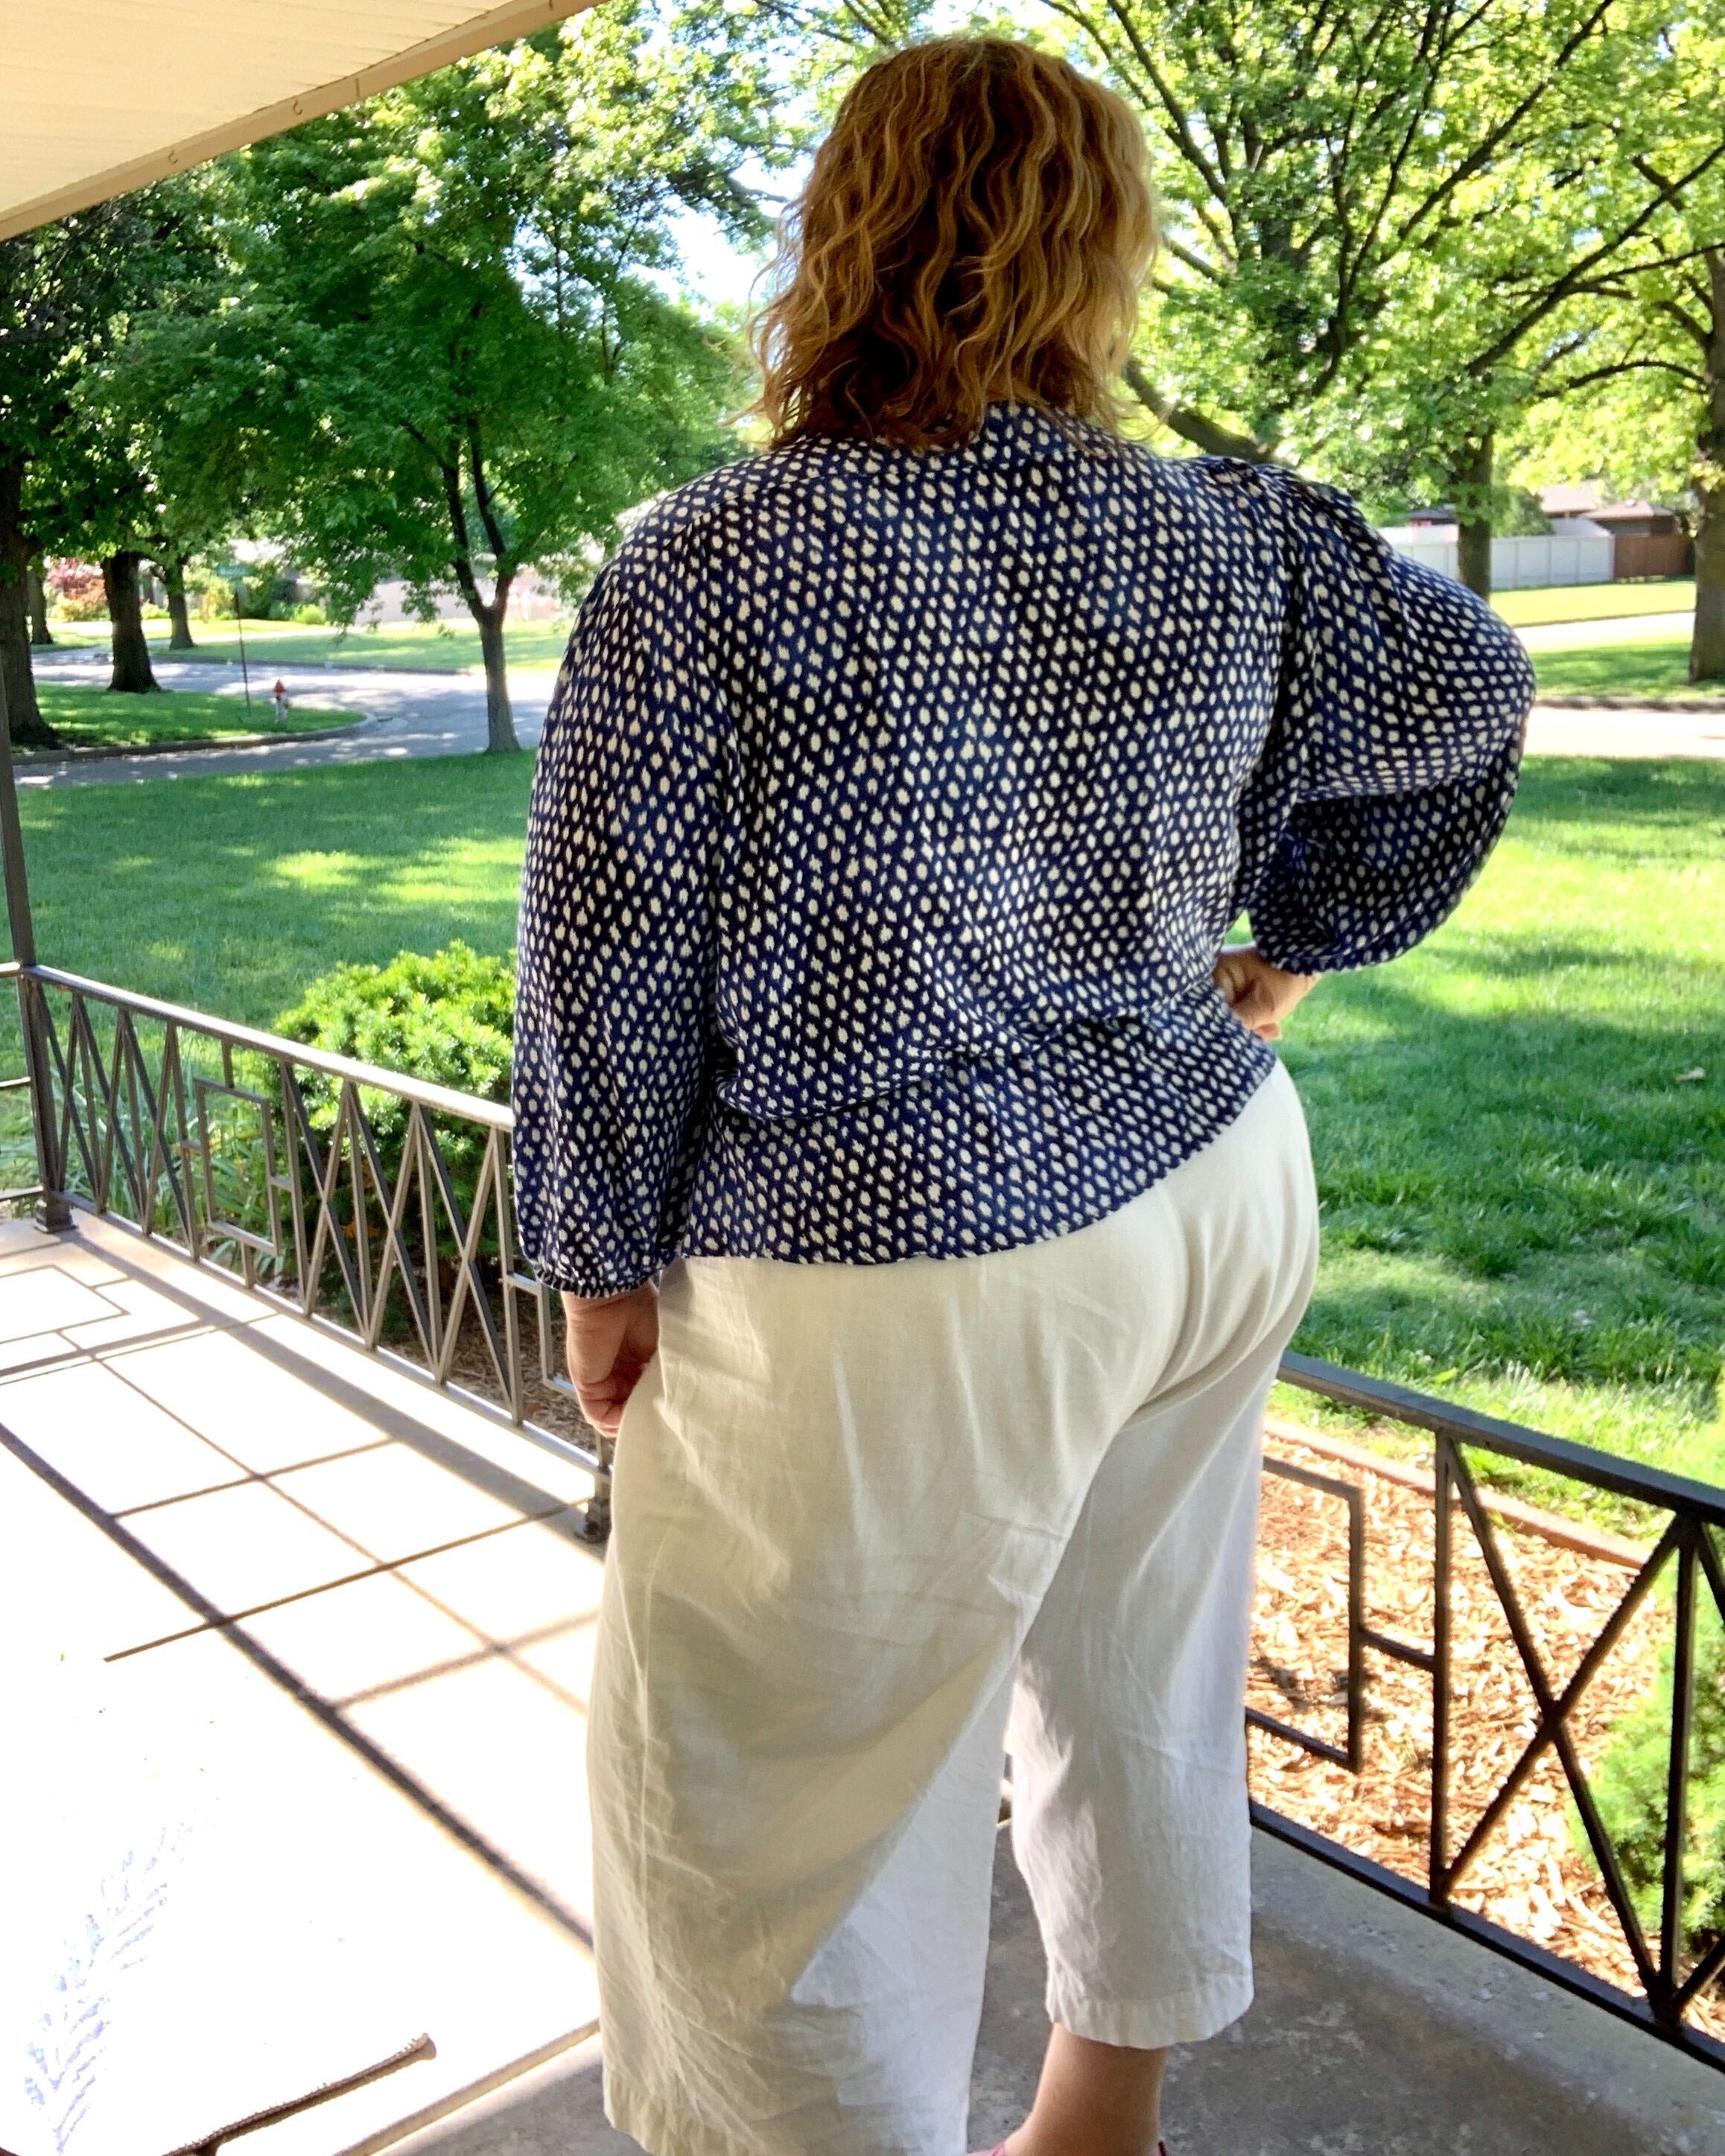 How to Add an Elastic Waist Band to Women's Pants – Go Gingham